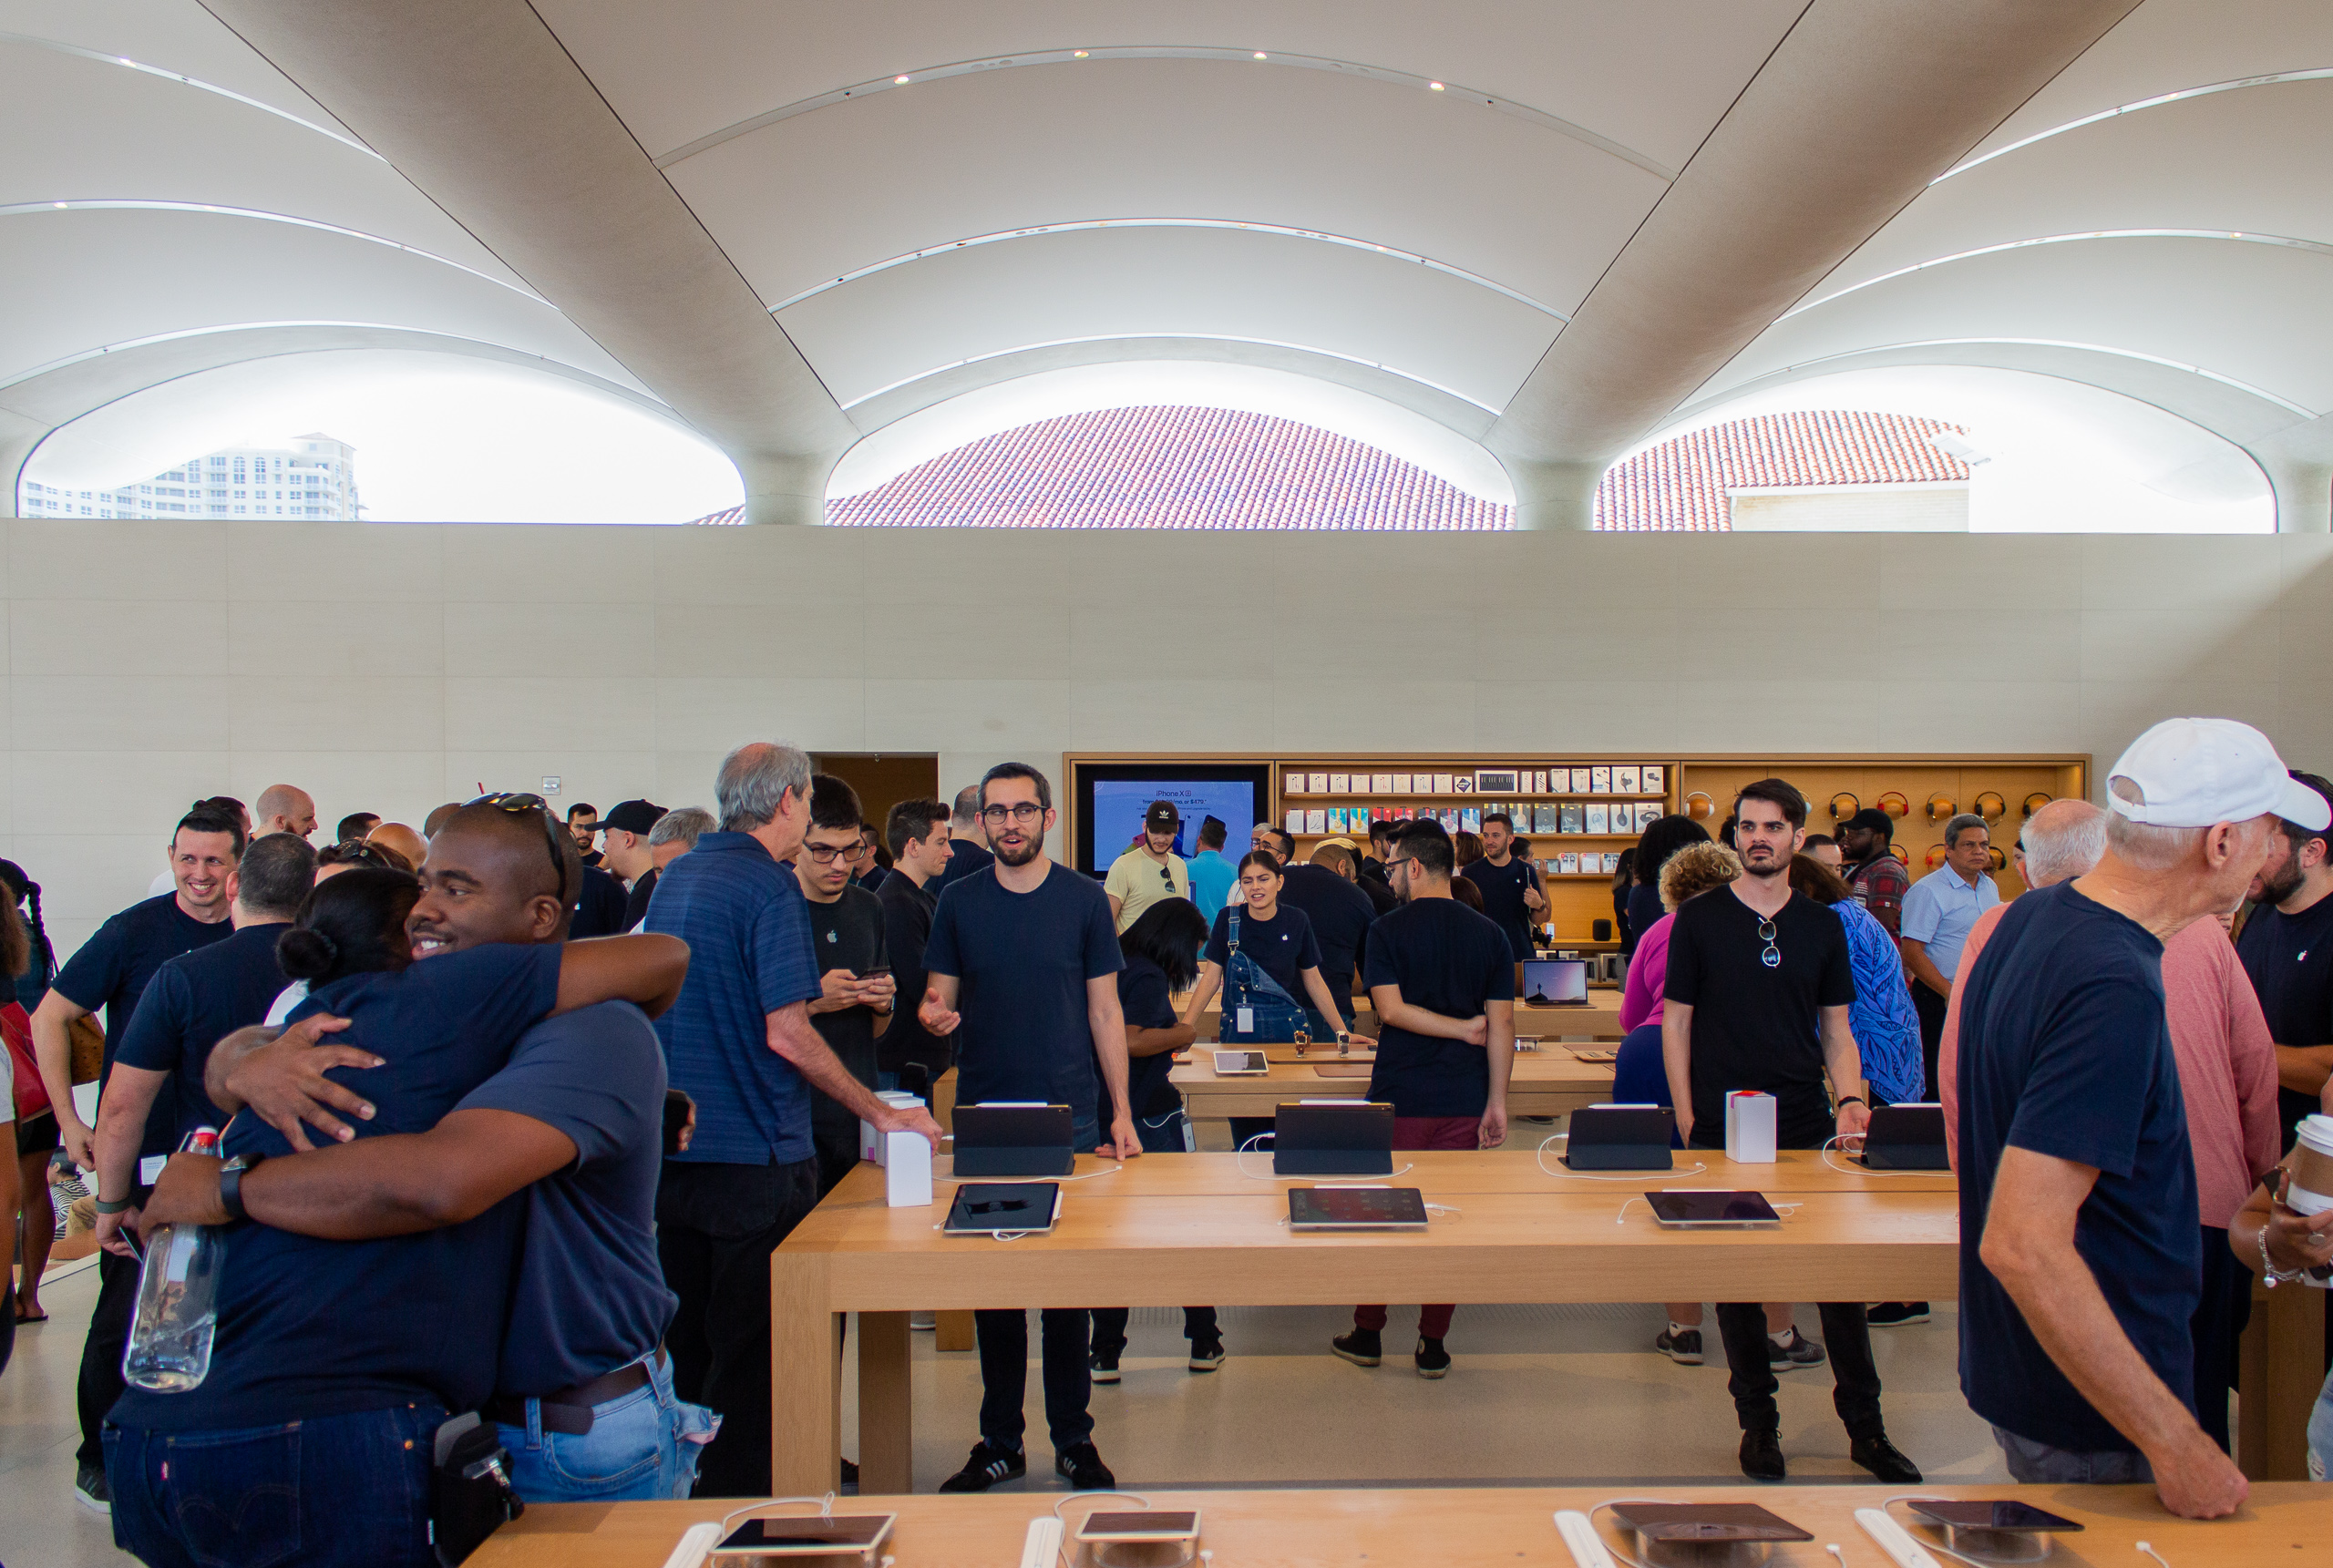 Aventura's new Apple Store: Grand opening photos and details - 9to5Mac